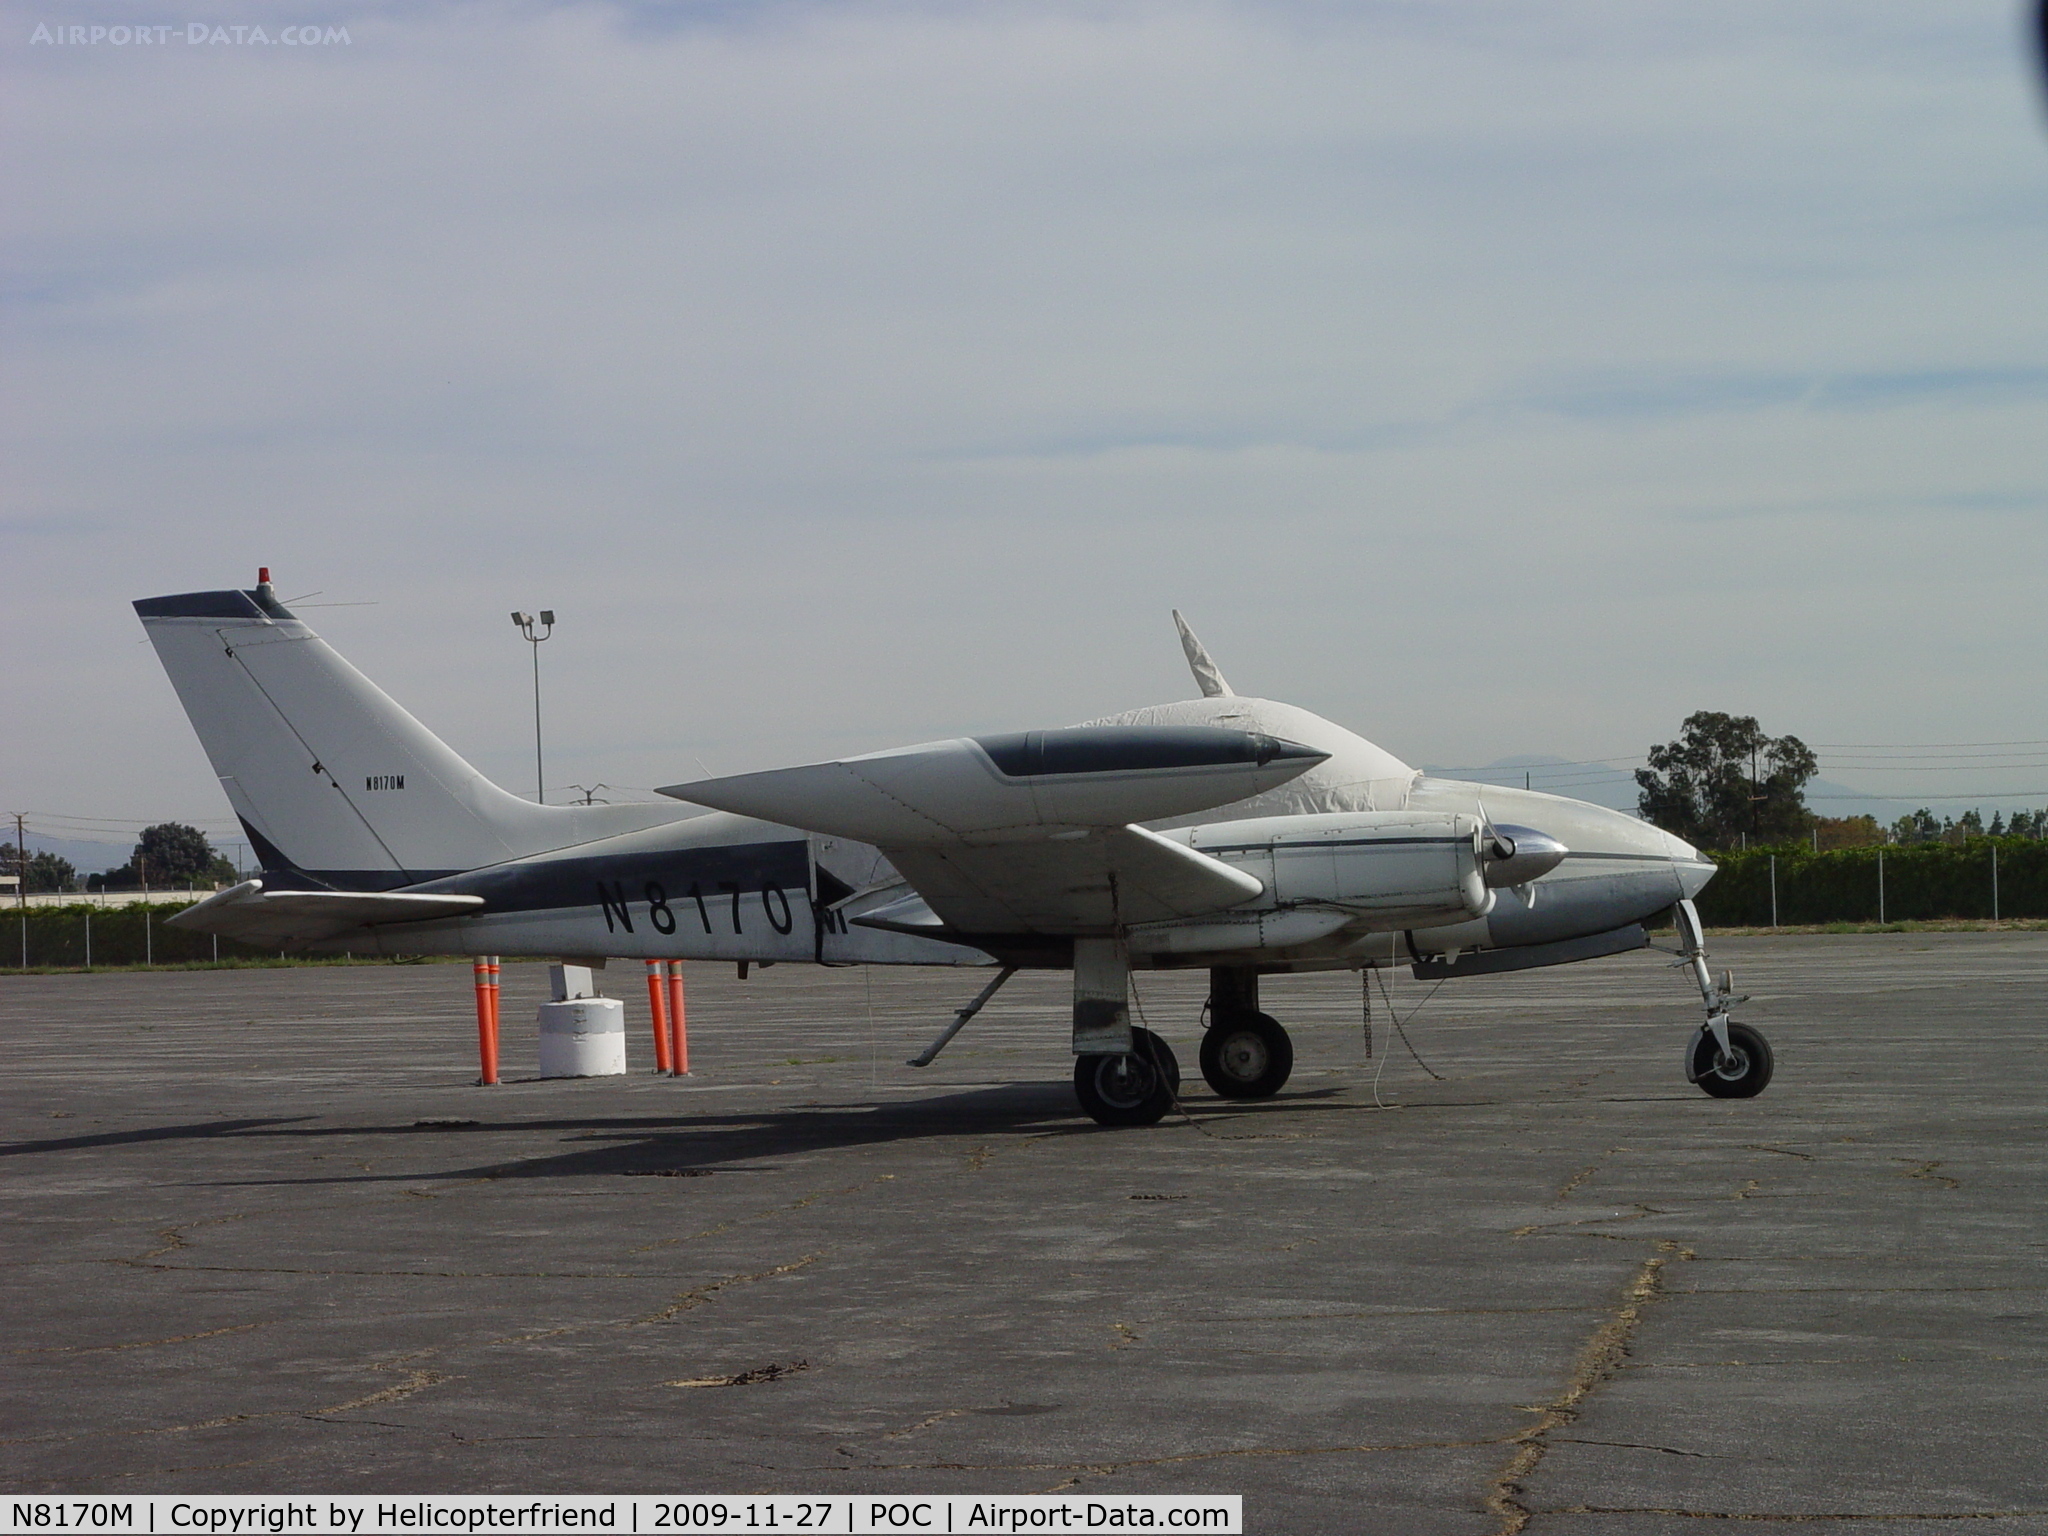 N8170M, 1964 Cessna 310I C/N 310I0170, Tied down, covered and waiting at Howard Aviation